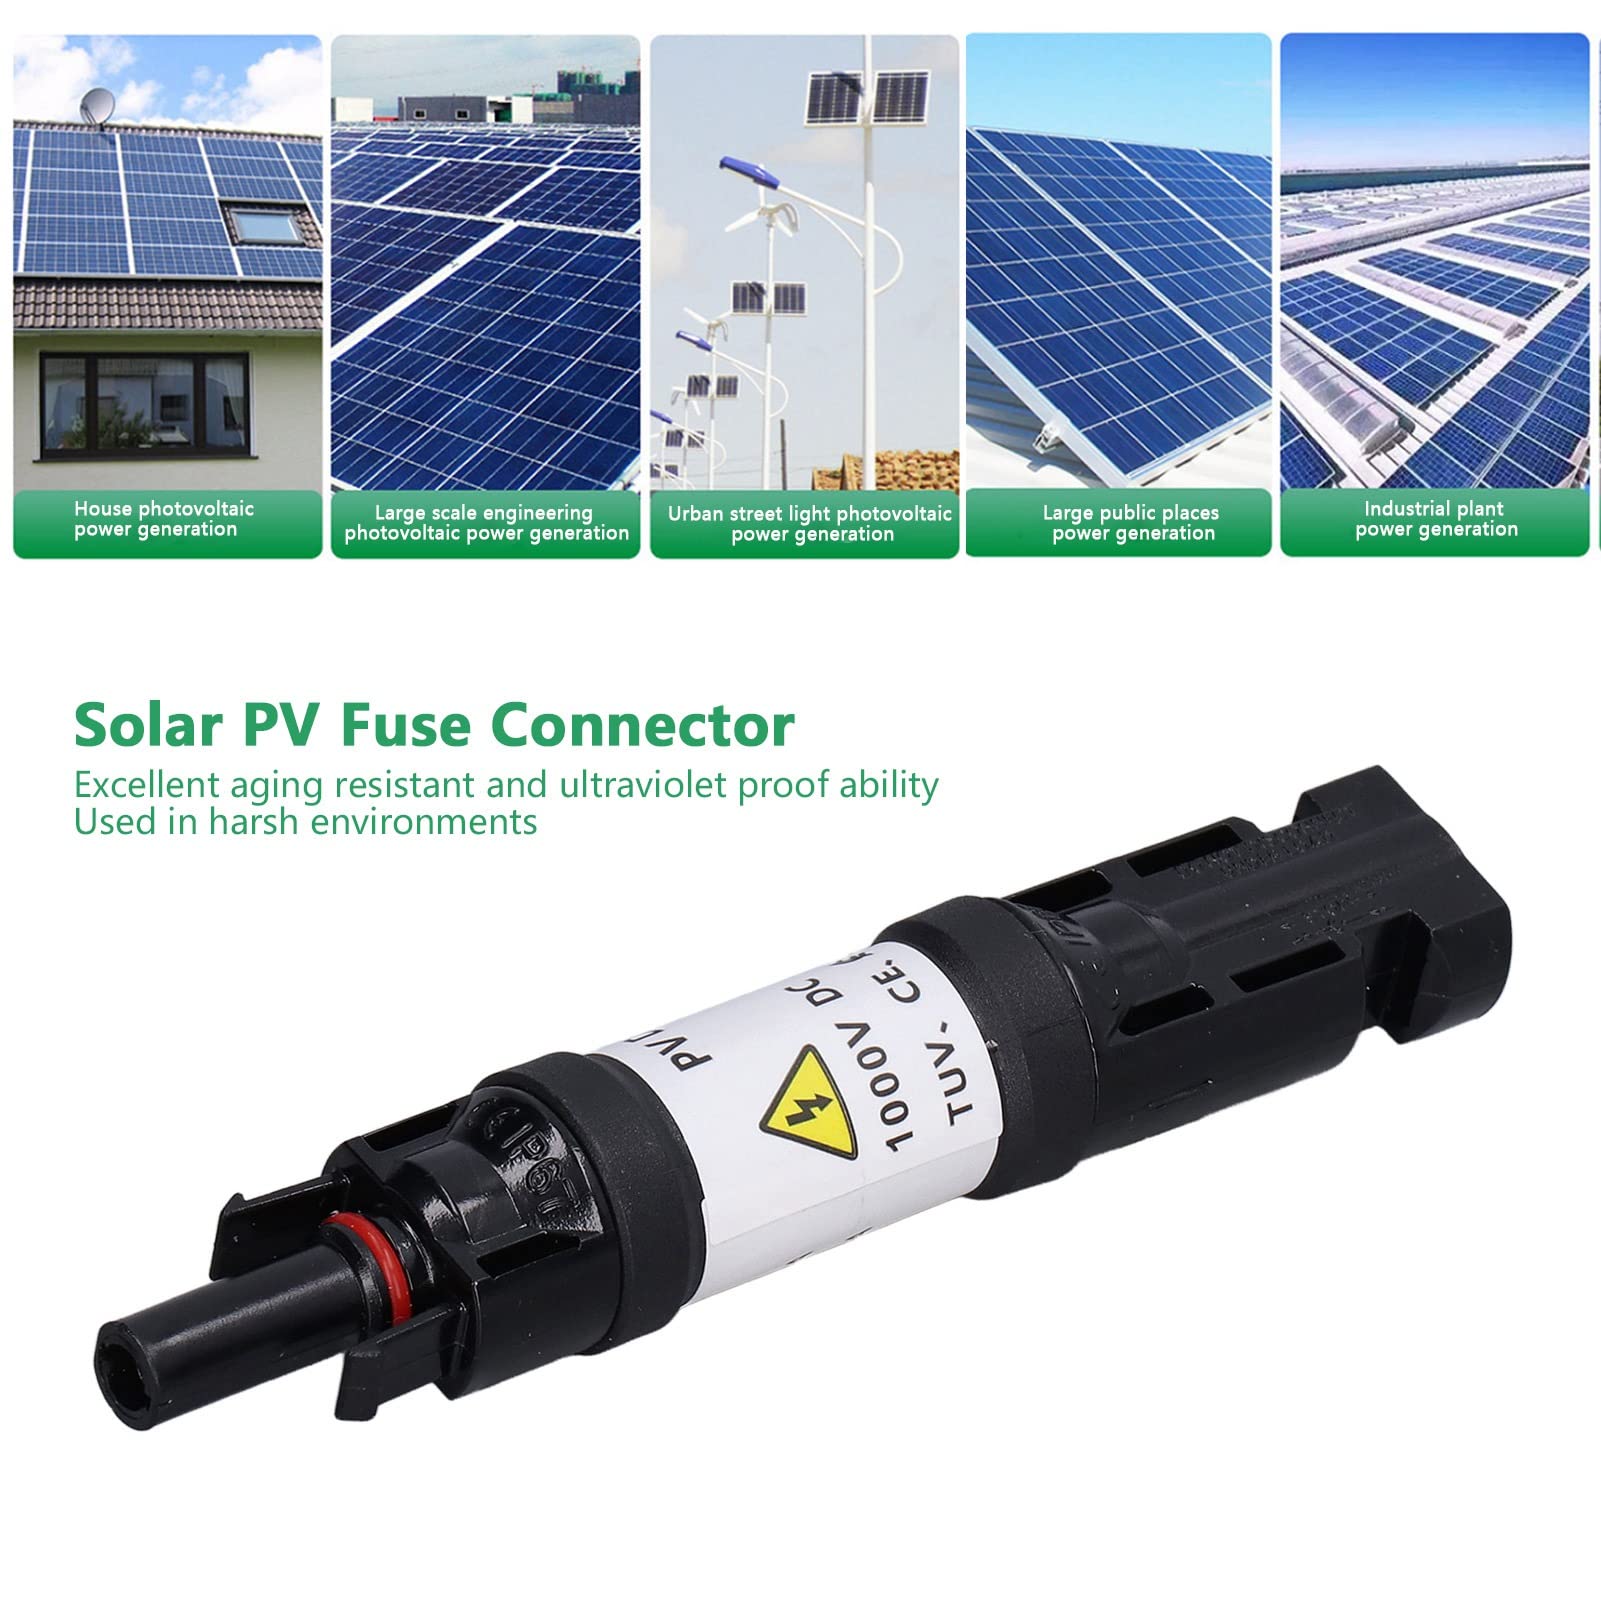 Solar PV Fuse Connector, Waterproof Solar Fuse Connector, Male Female IP67 Dustproof Panel Cable Blocking Diode Holder 1000V with Guiding Insulation Element(30A)